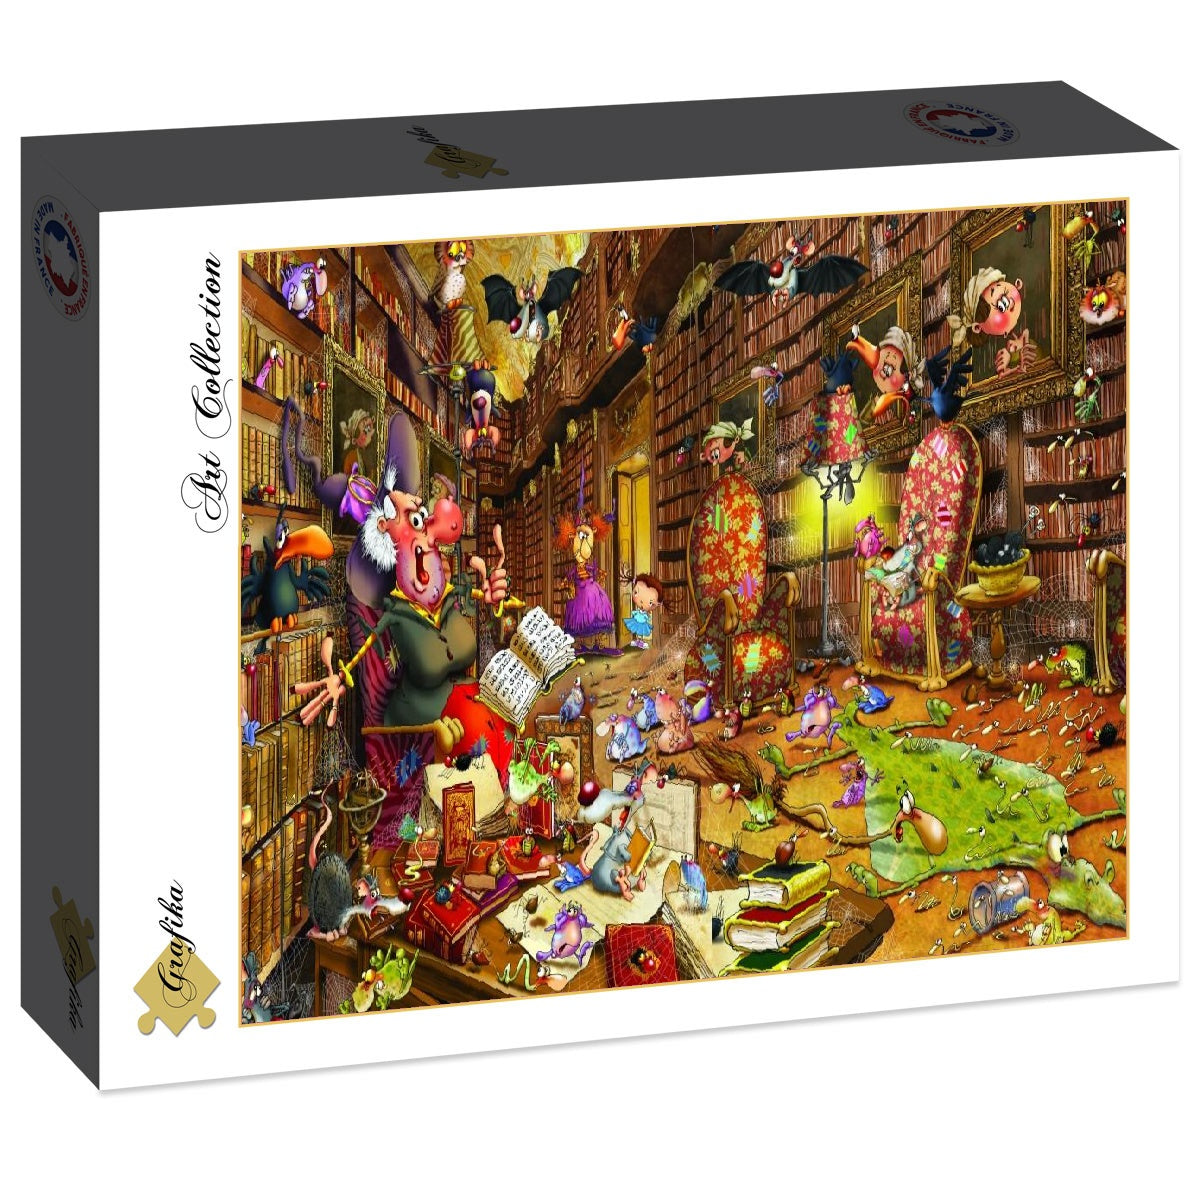 Witch by Francois Ruyer, 1500 Piece Puzzle